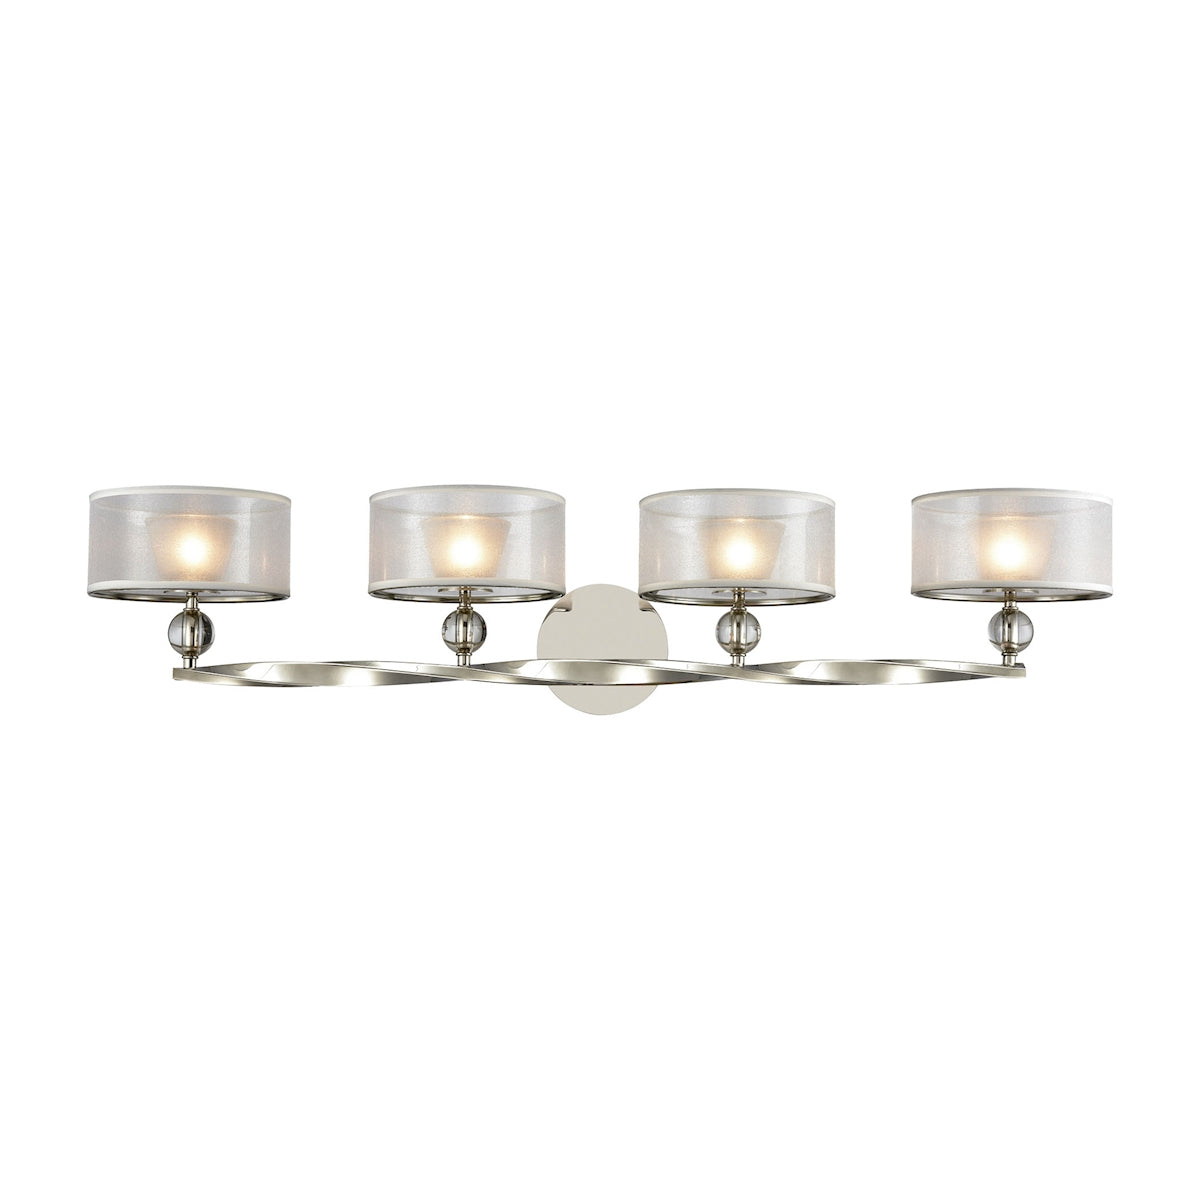 ELK Lighting 32293/4 Corisande 4-Light Vanity Lamp in Polished Nickel with Silver Organza Drum Shades and Frosted Glass